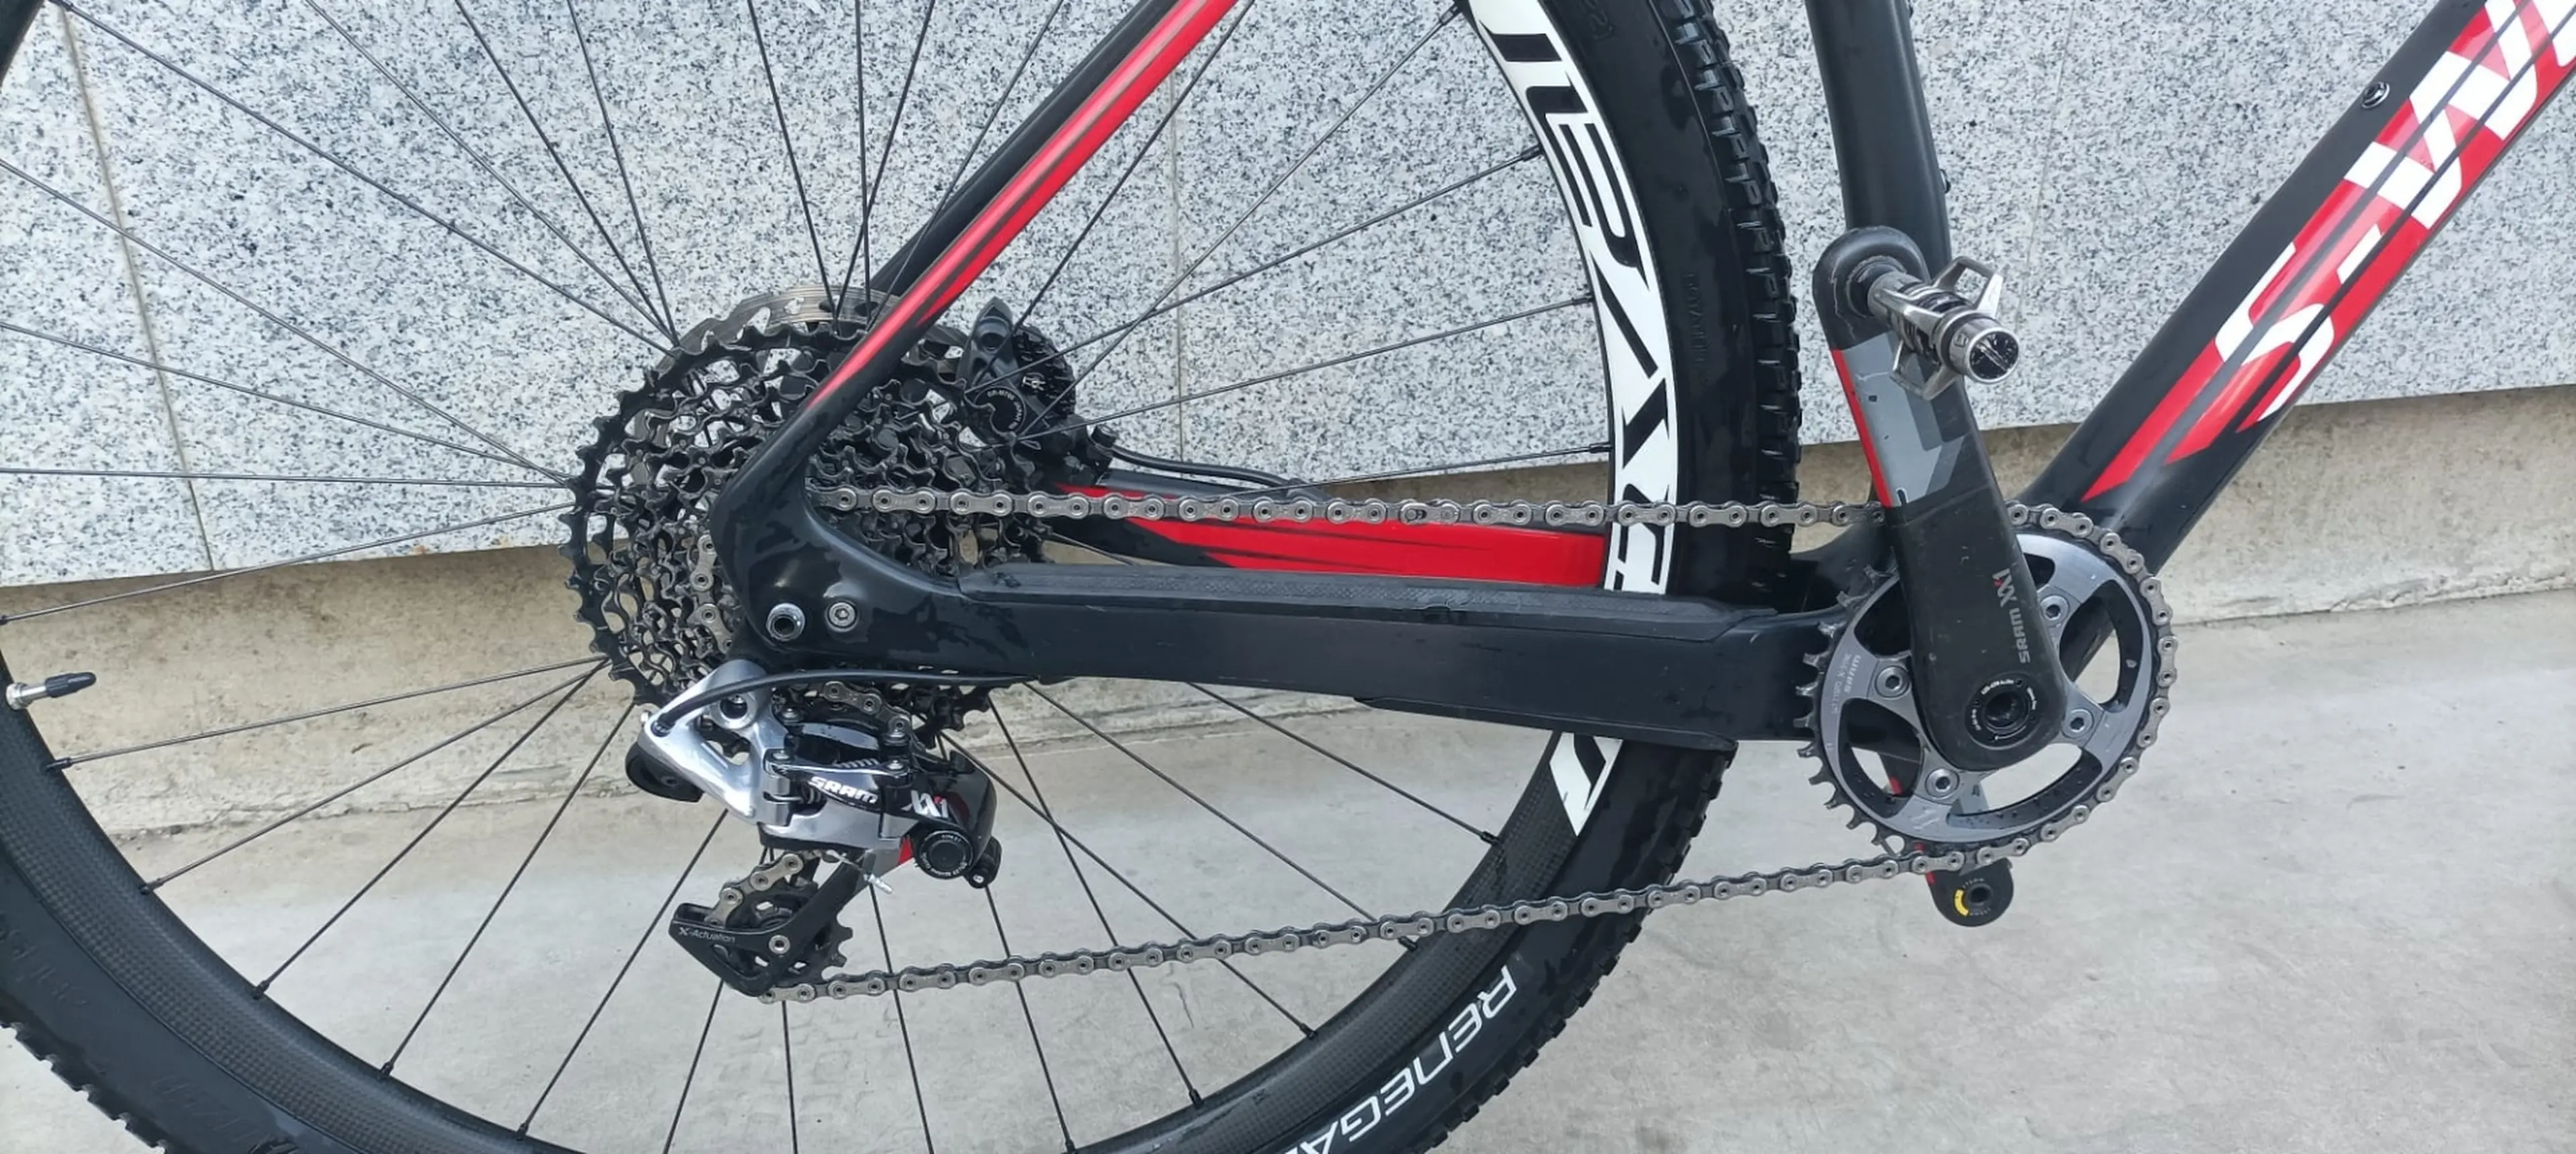 3. Specialized stumpjumper S-Works